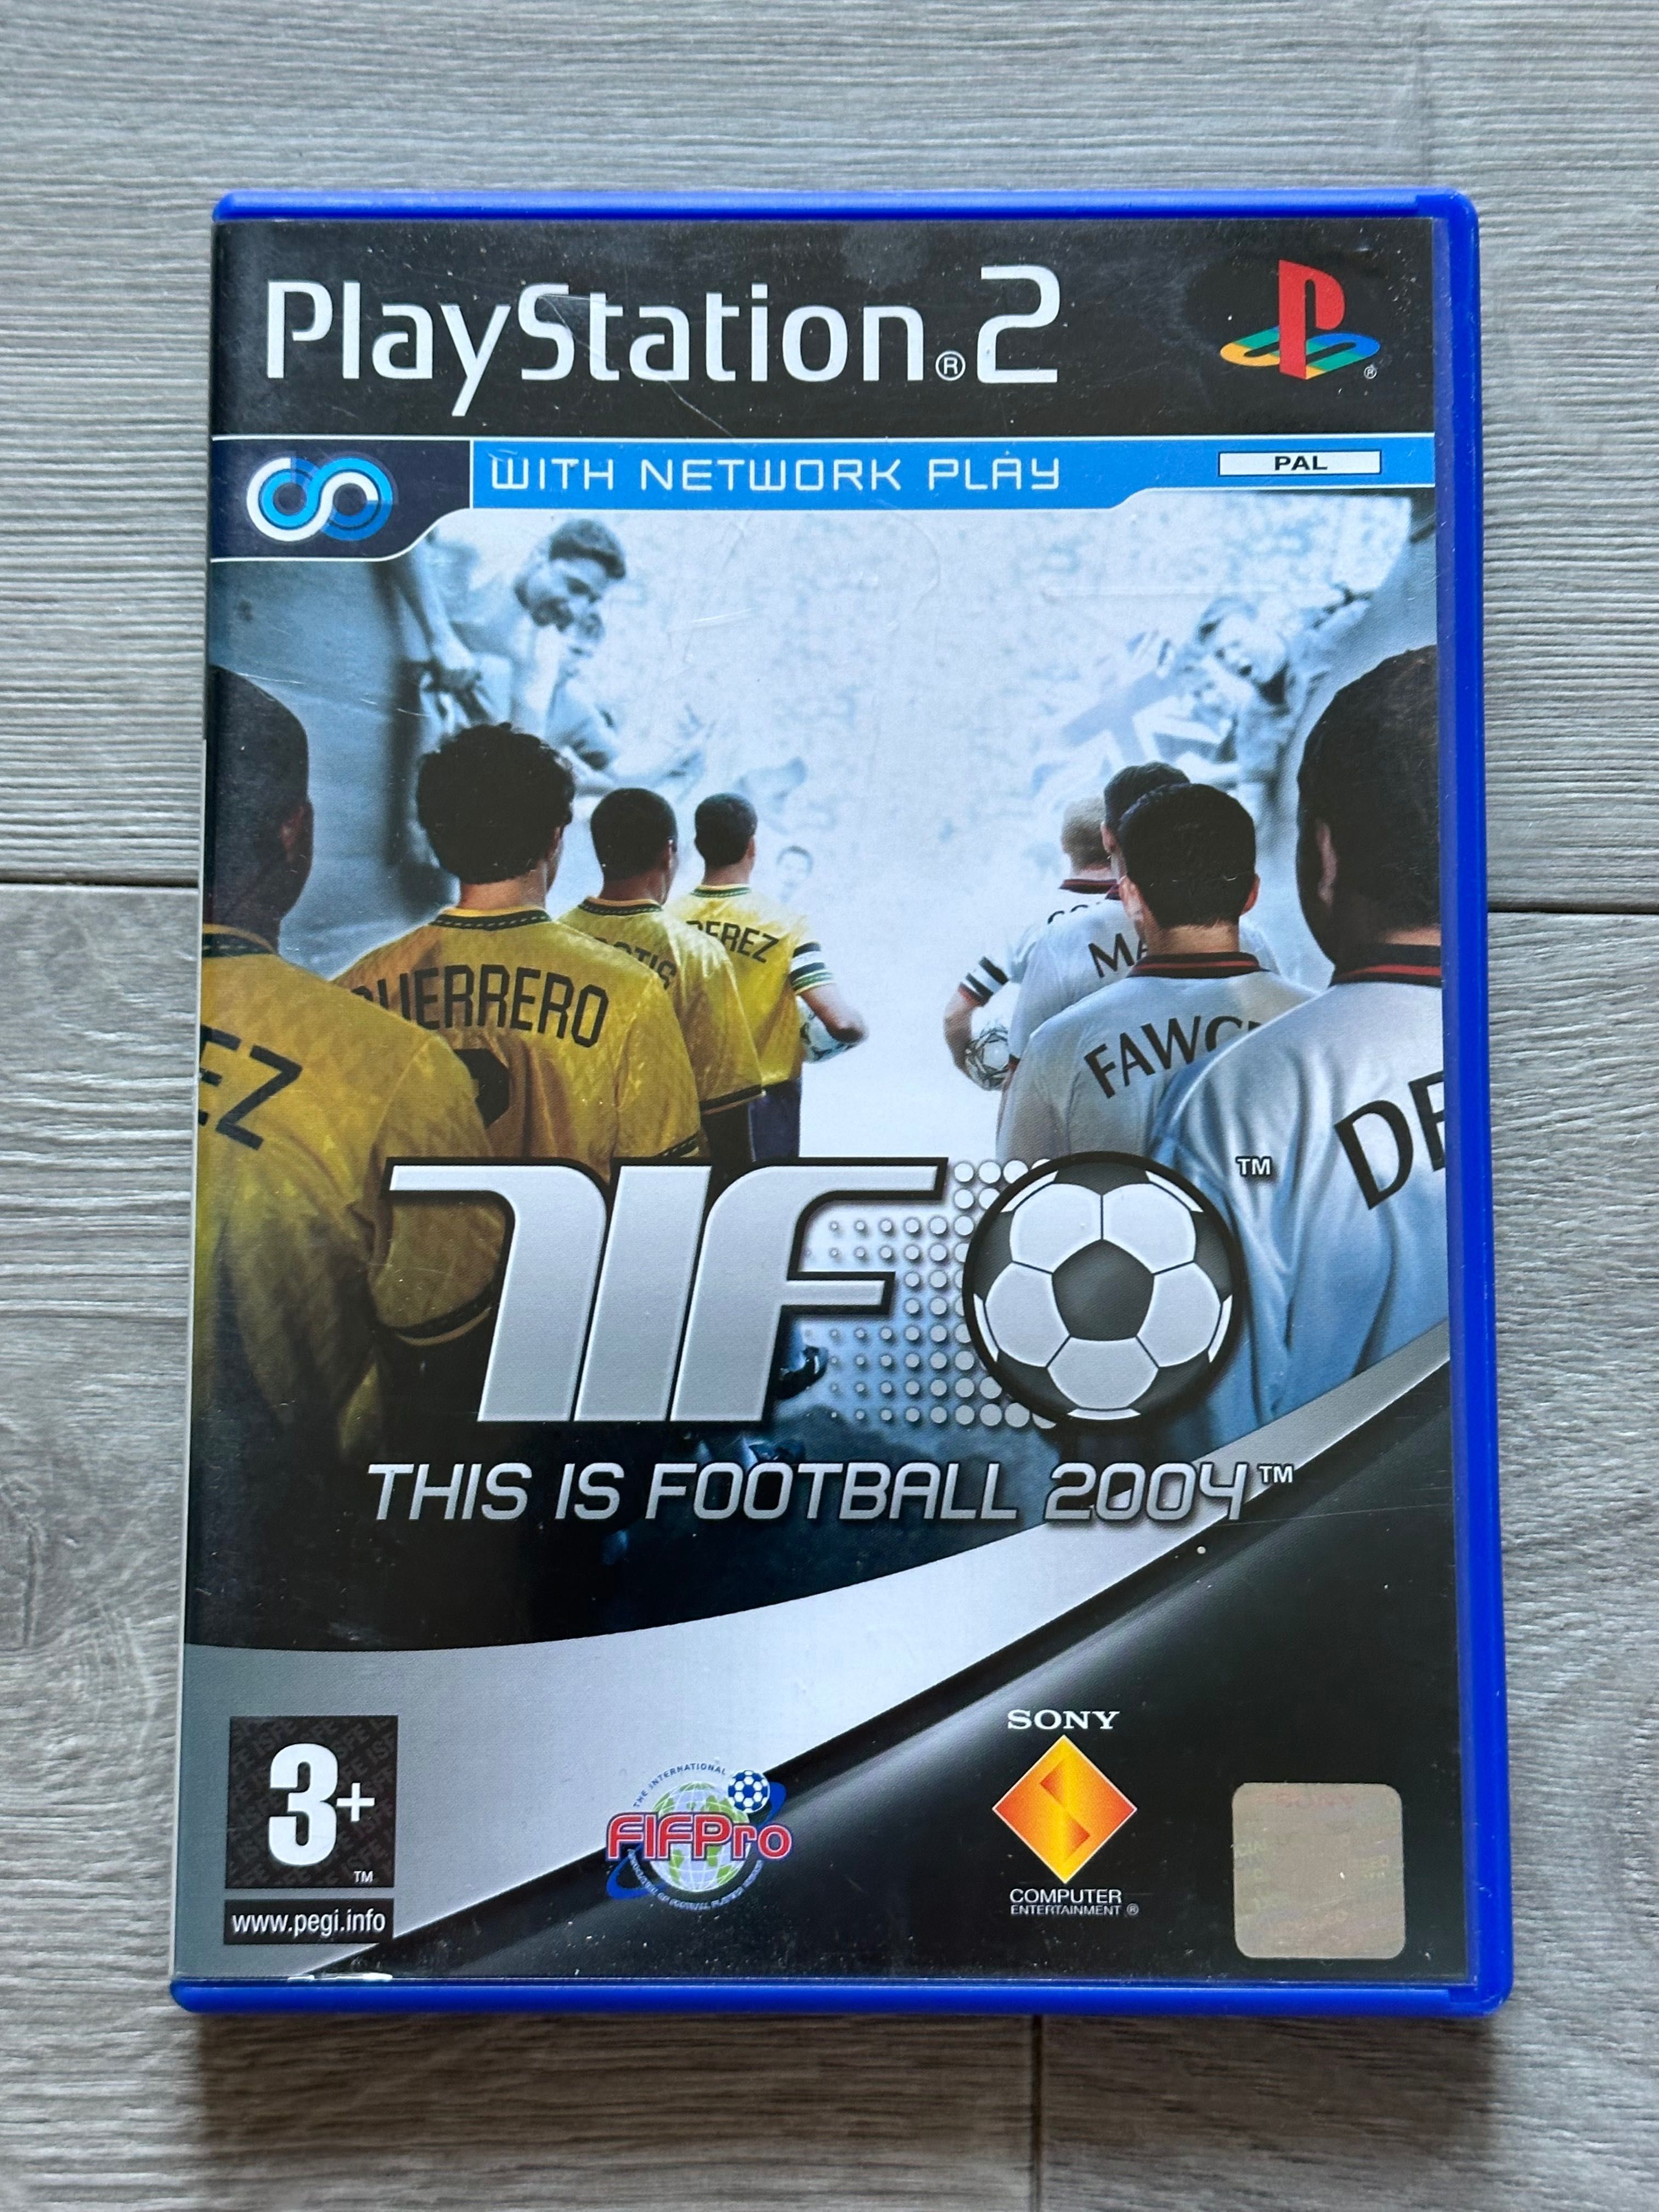 This is Football 2004 / Playstation 2